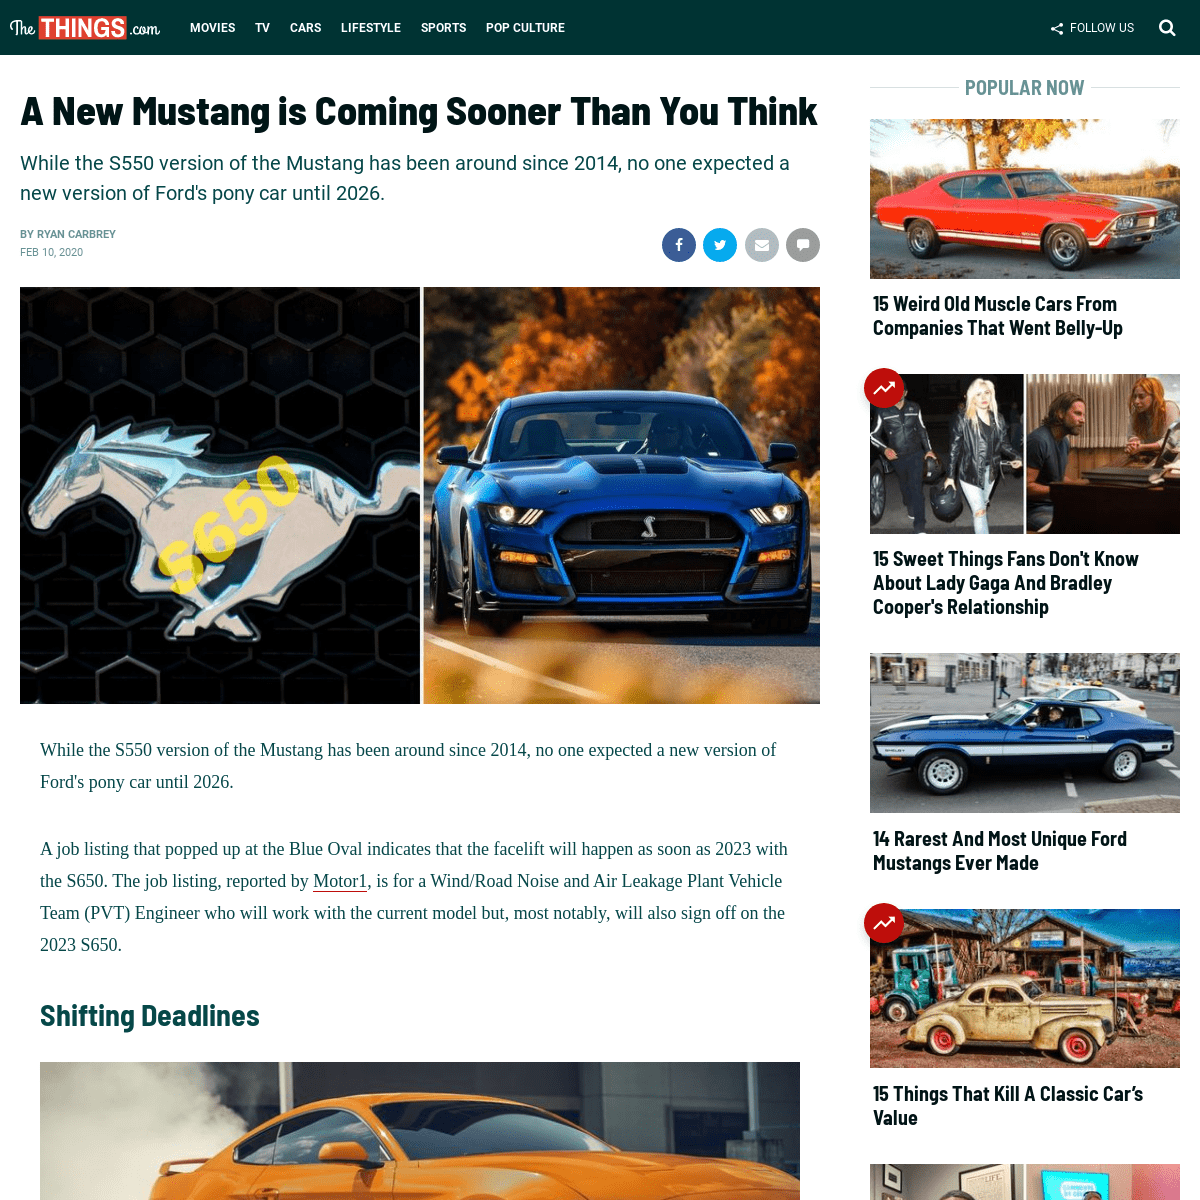 A complete backup of www.thethings.com/a-new-mustang-is-coming-sooner-than-you-think/